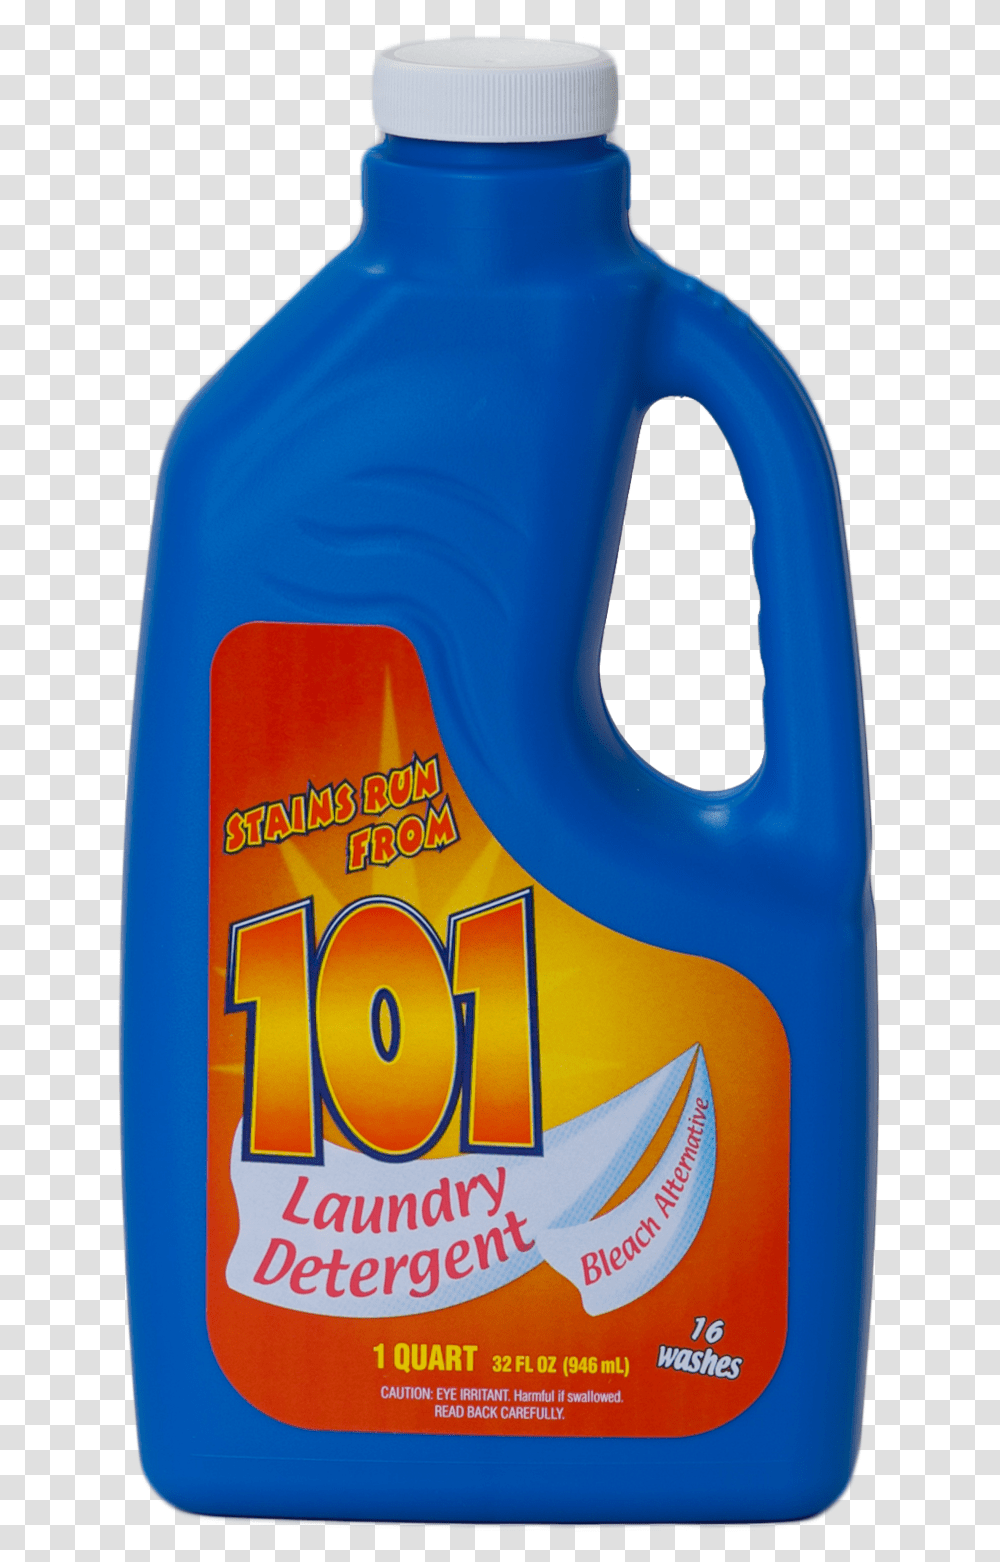 101 Laundry Detergent, Bottle, Fire Hydrant, Beer, Alcohol Transparent Png